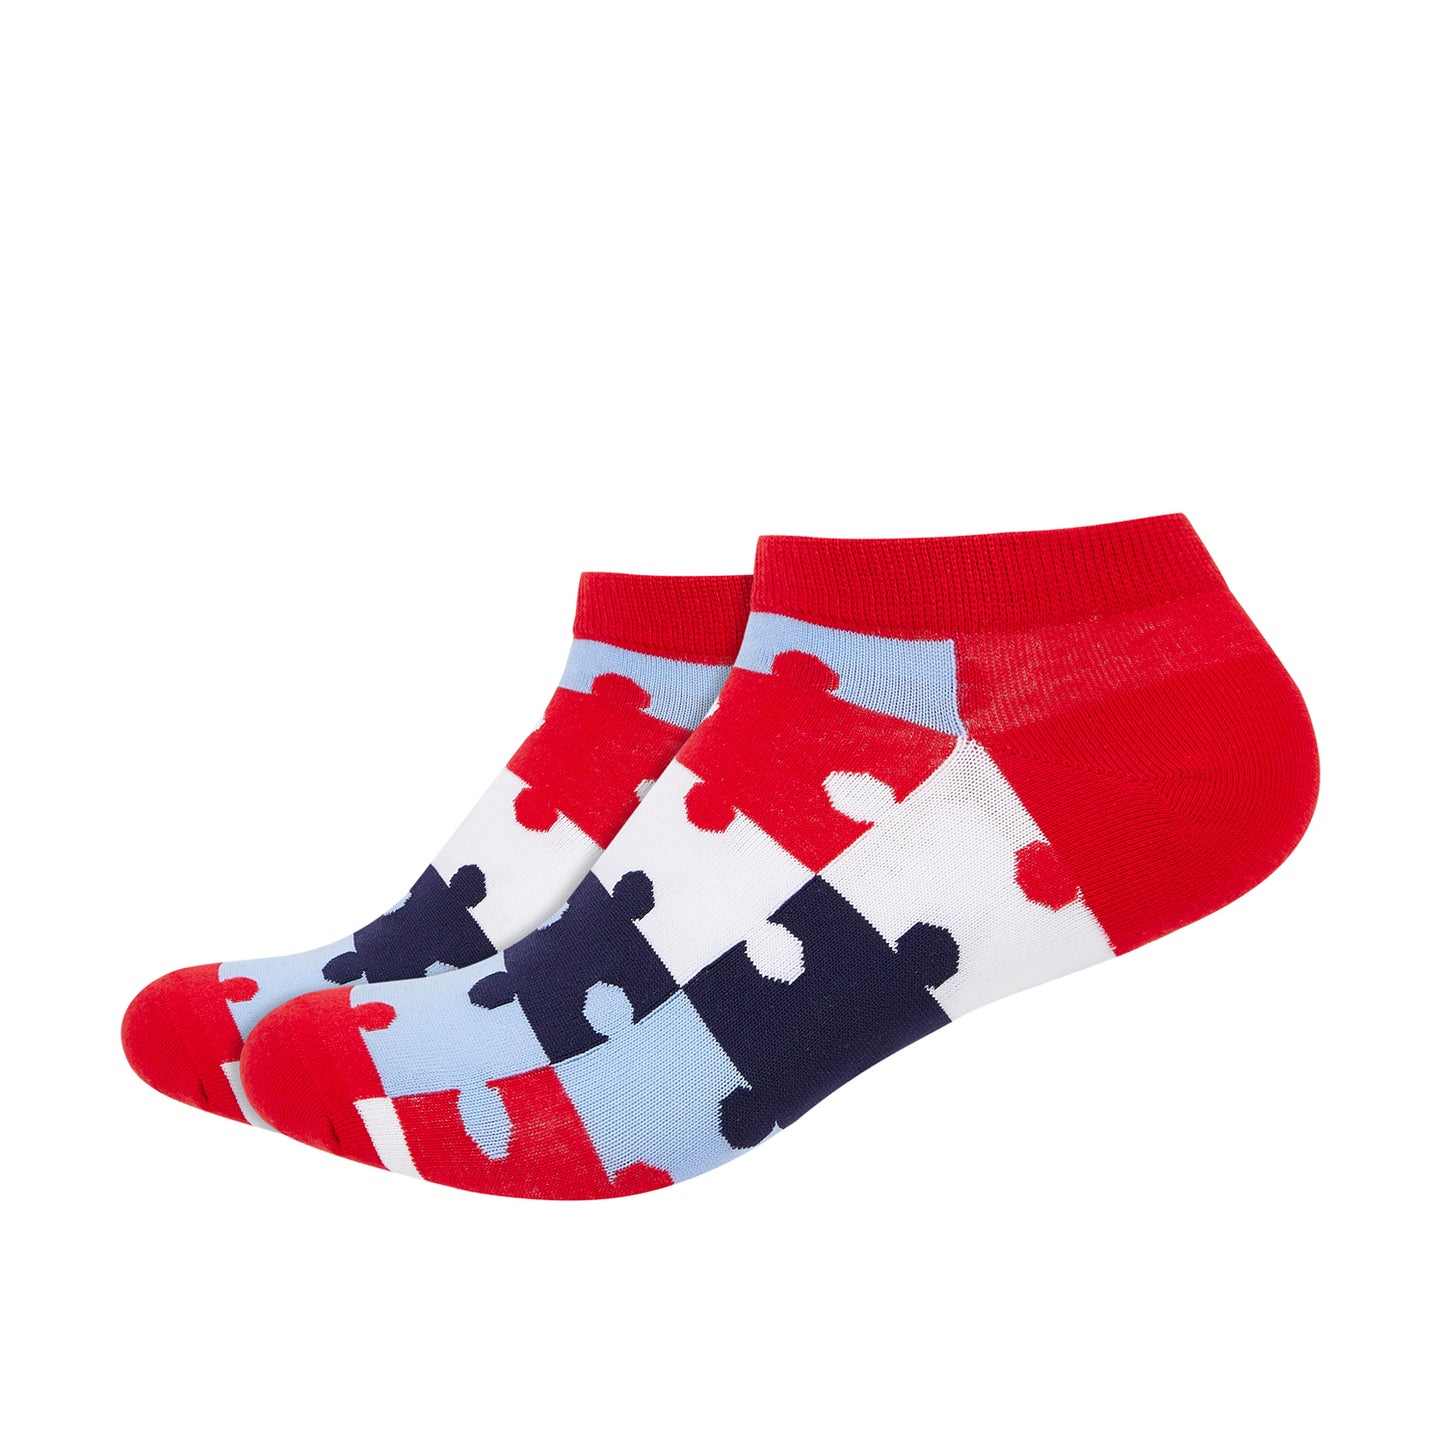 Puzzle Printed Ankle Socks - IDENTITY Apparel Shop